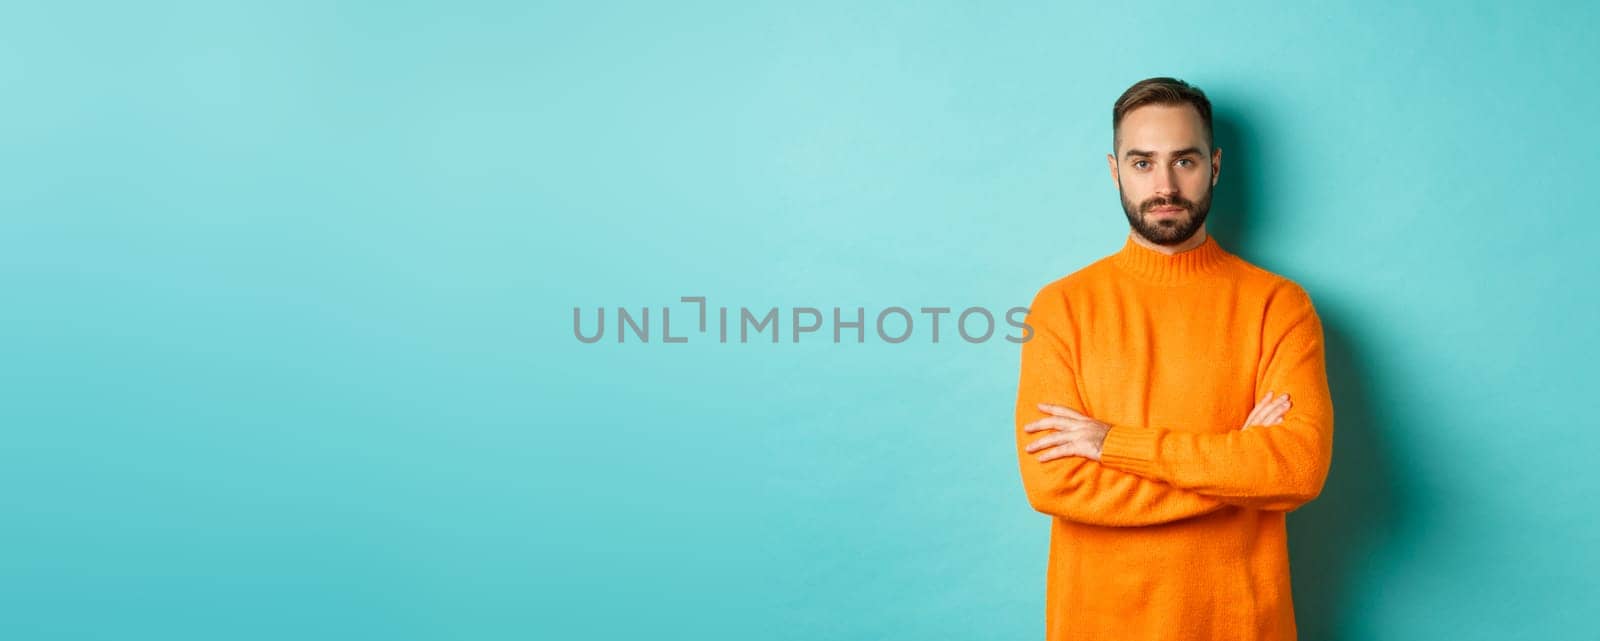 Confident young man looking determined, cross arms on chest, wearing orange winter sweater, standing against turquoise studio background.